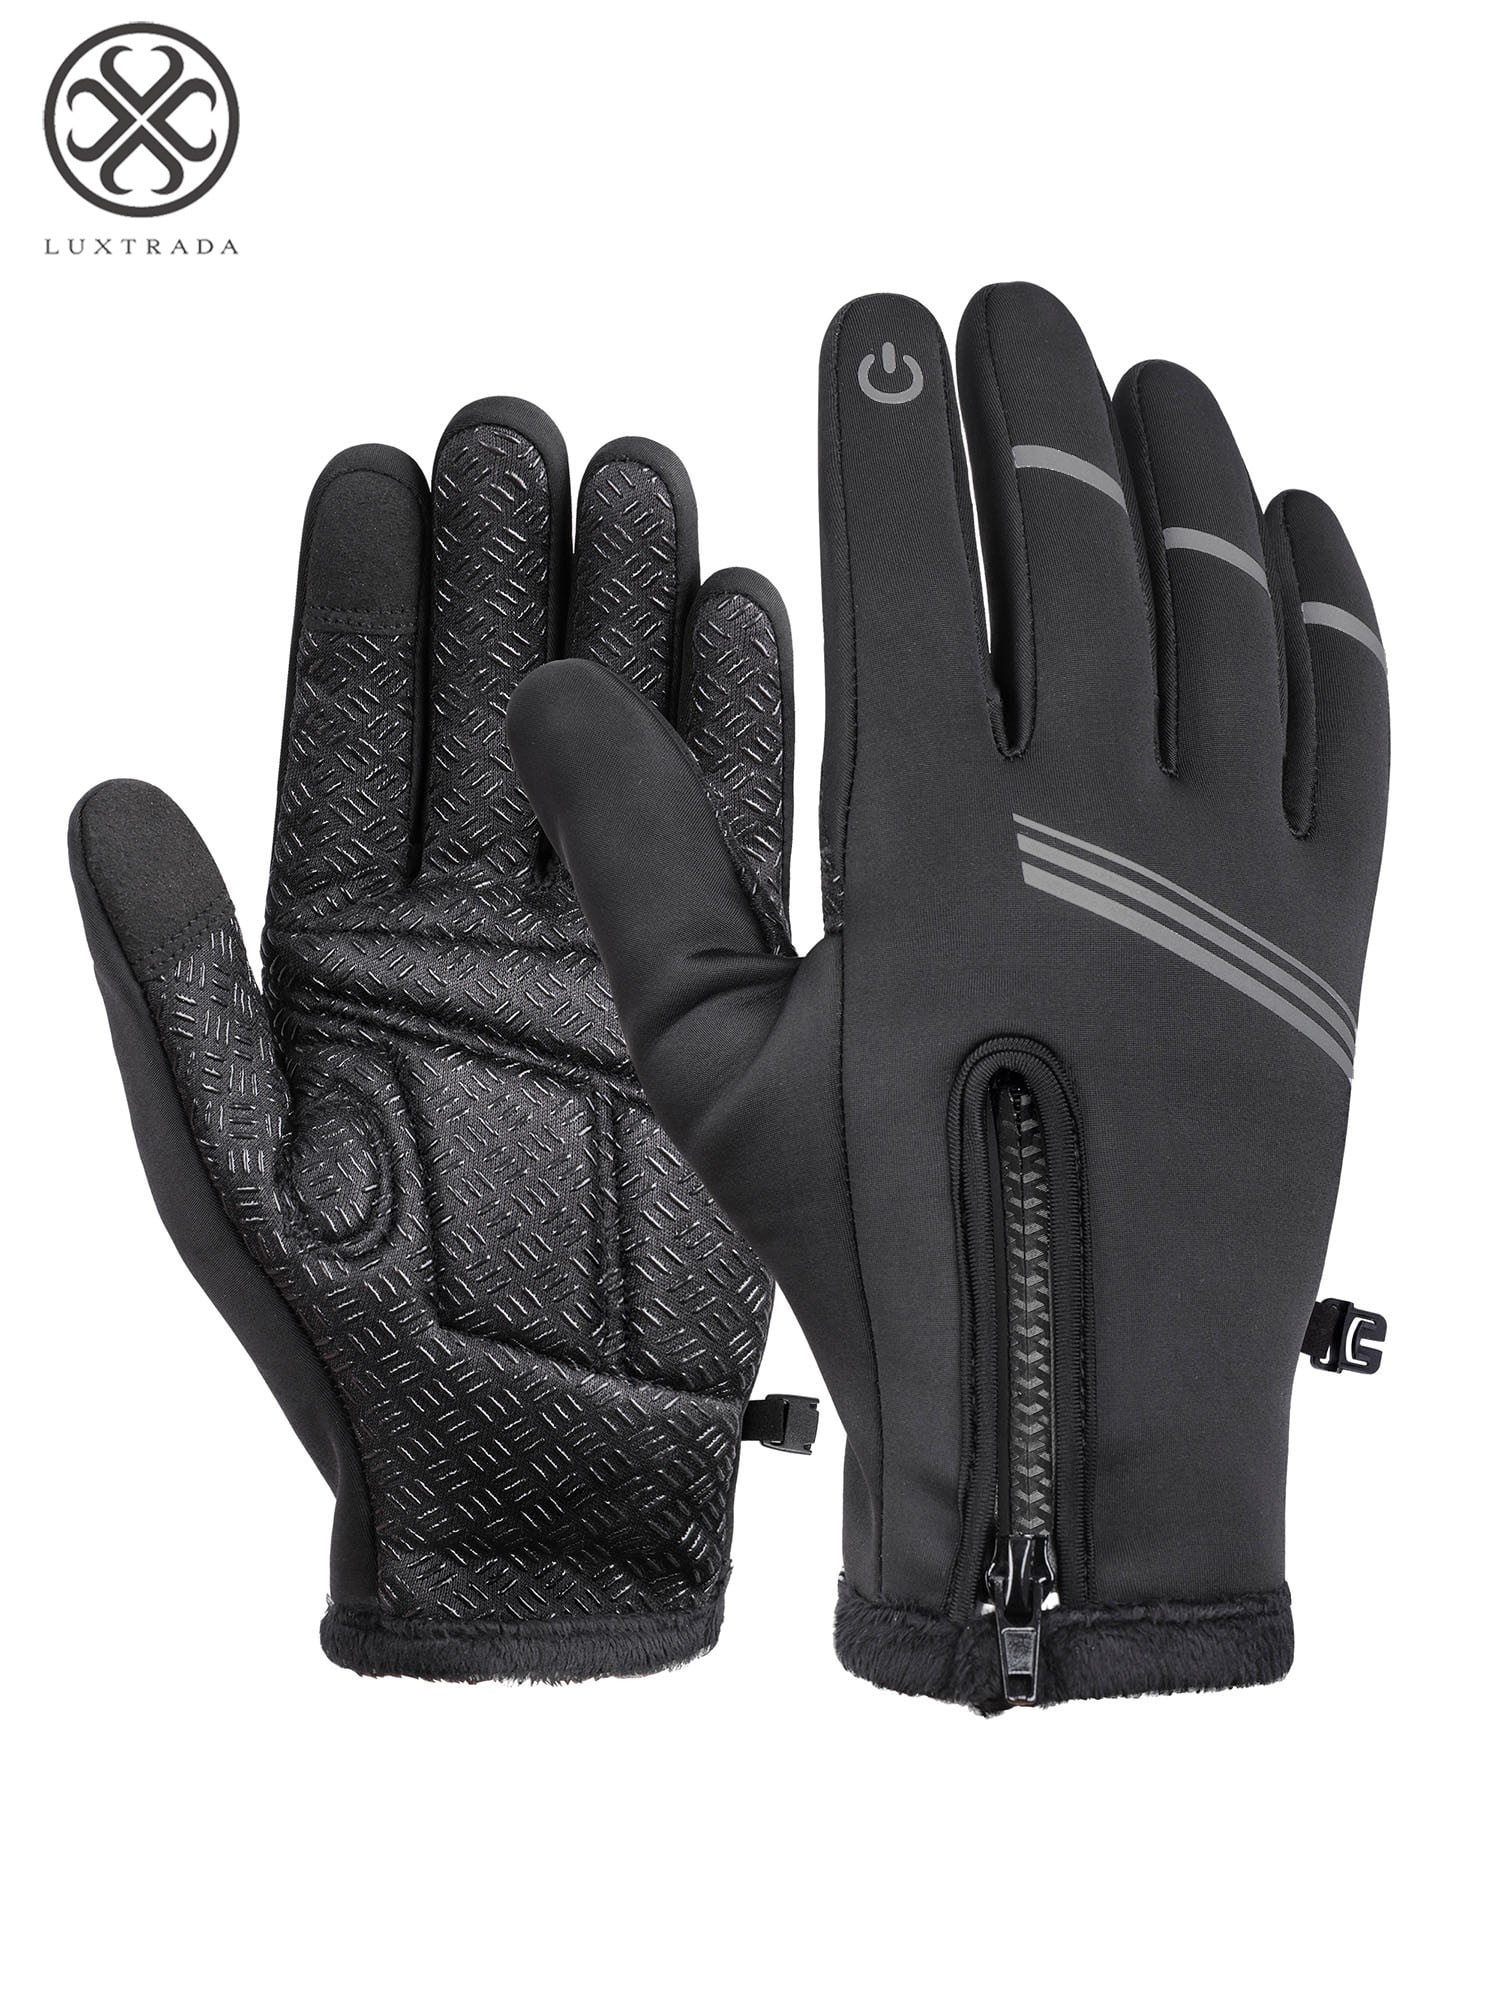 Men Women Winter Gloves Touch Screen Windproof Waterproof Leather Thick Snow